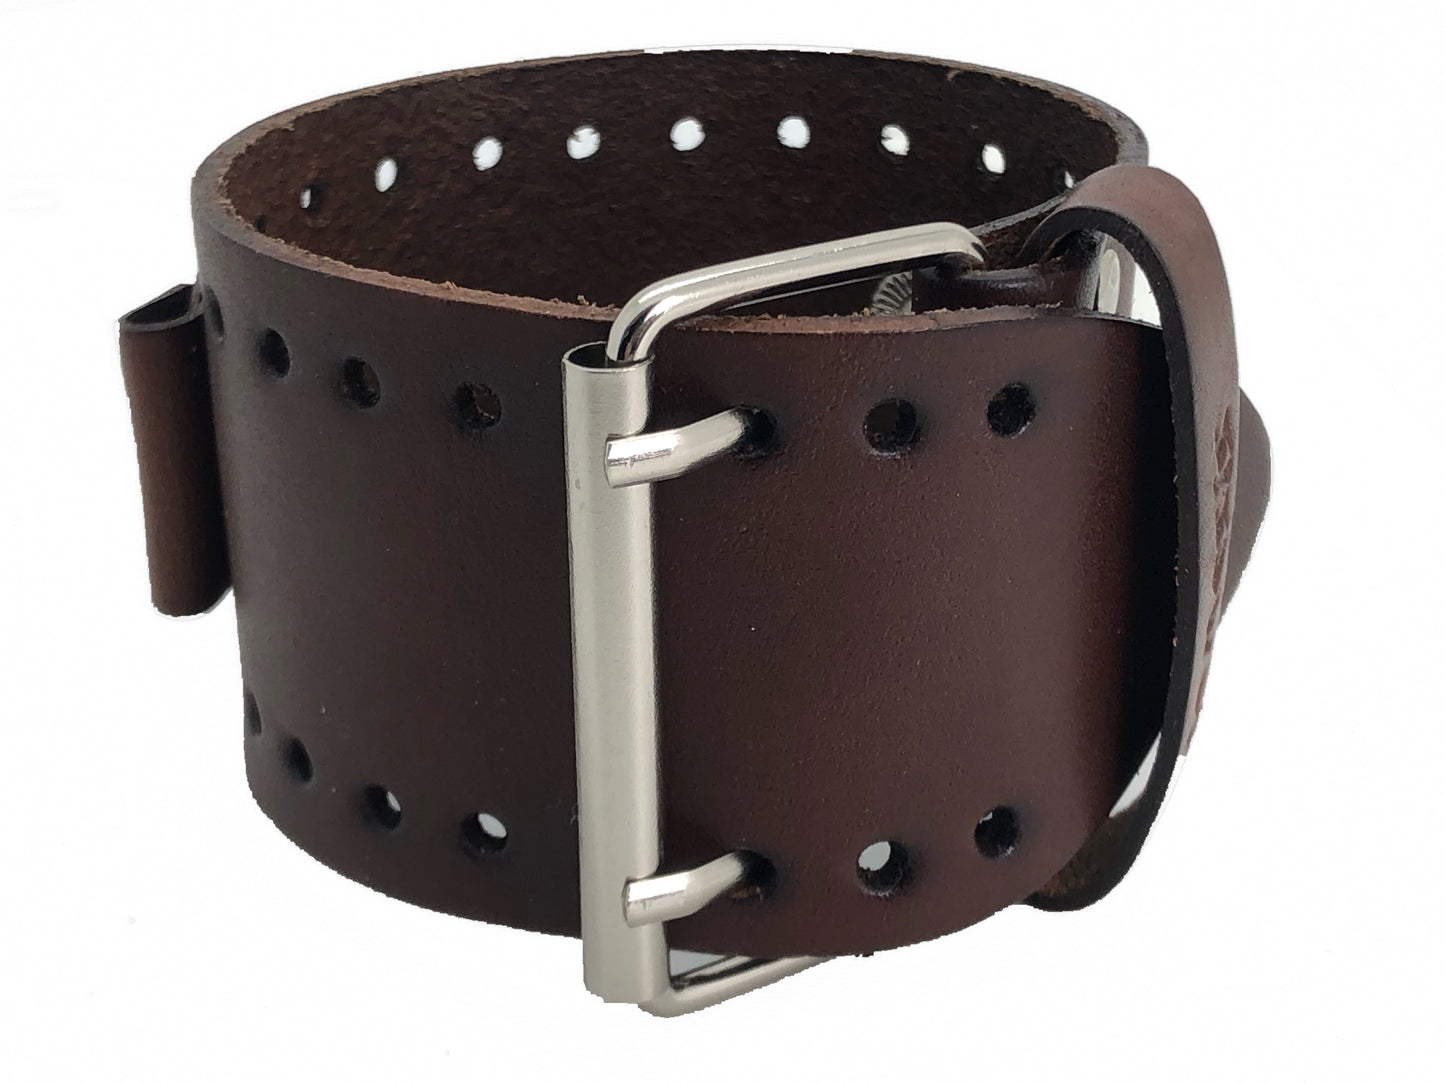 Moonwalker Luminous Blue Diver with Perforated Brown Leather Cuff